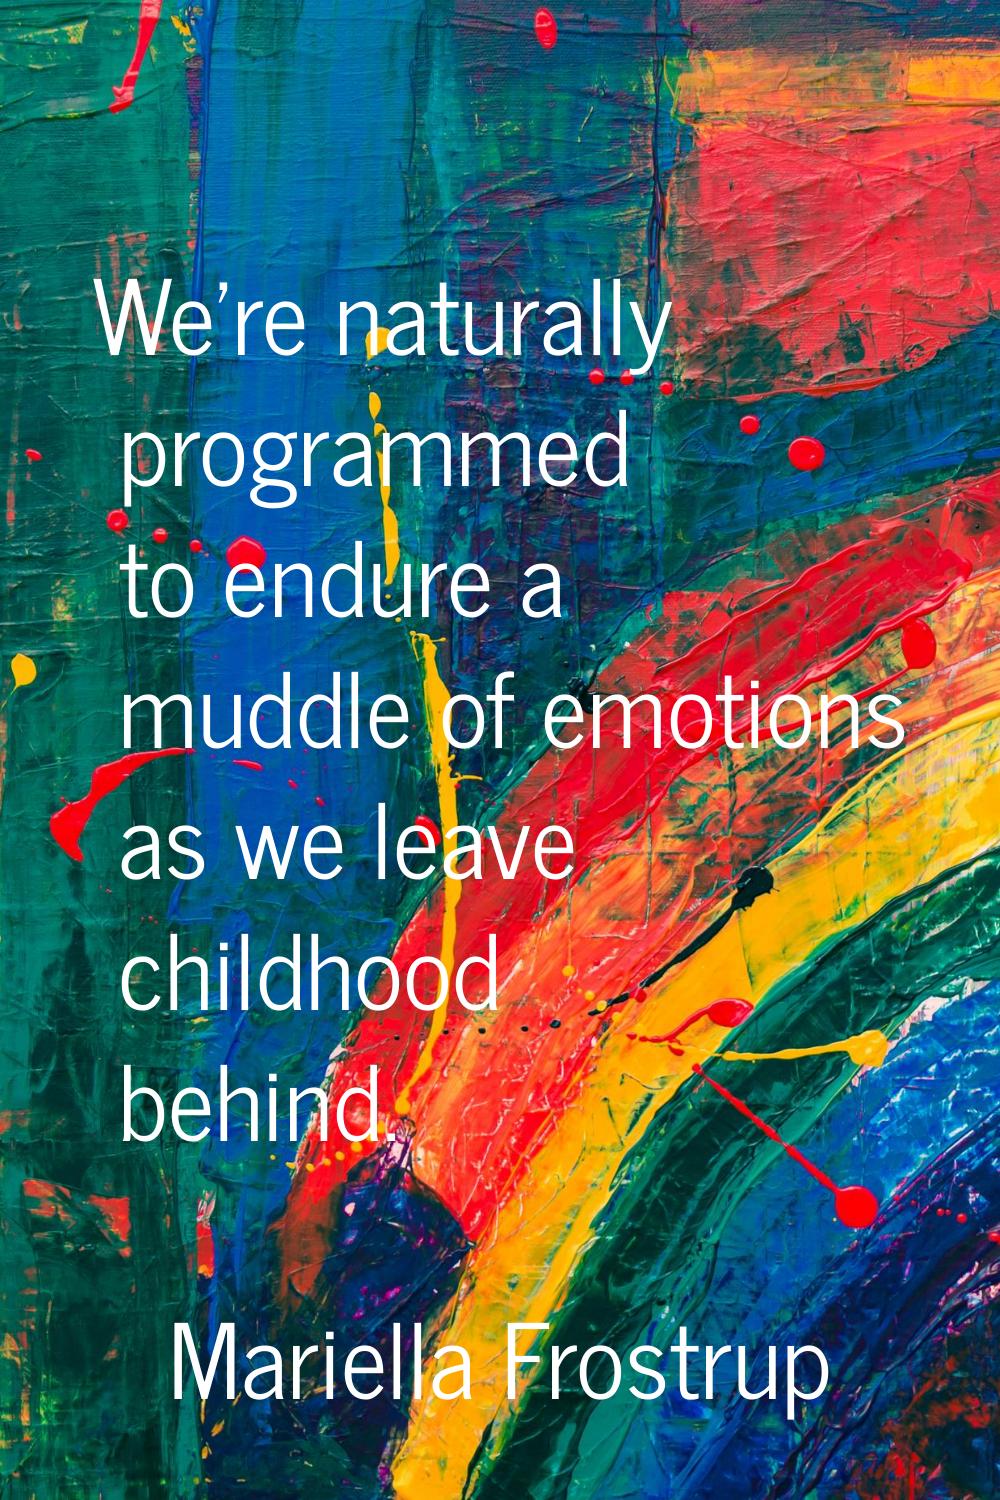 We're naturally programmed to endure a muddle of emotions as we leave childhood behind.